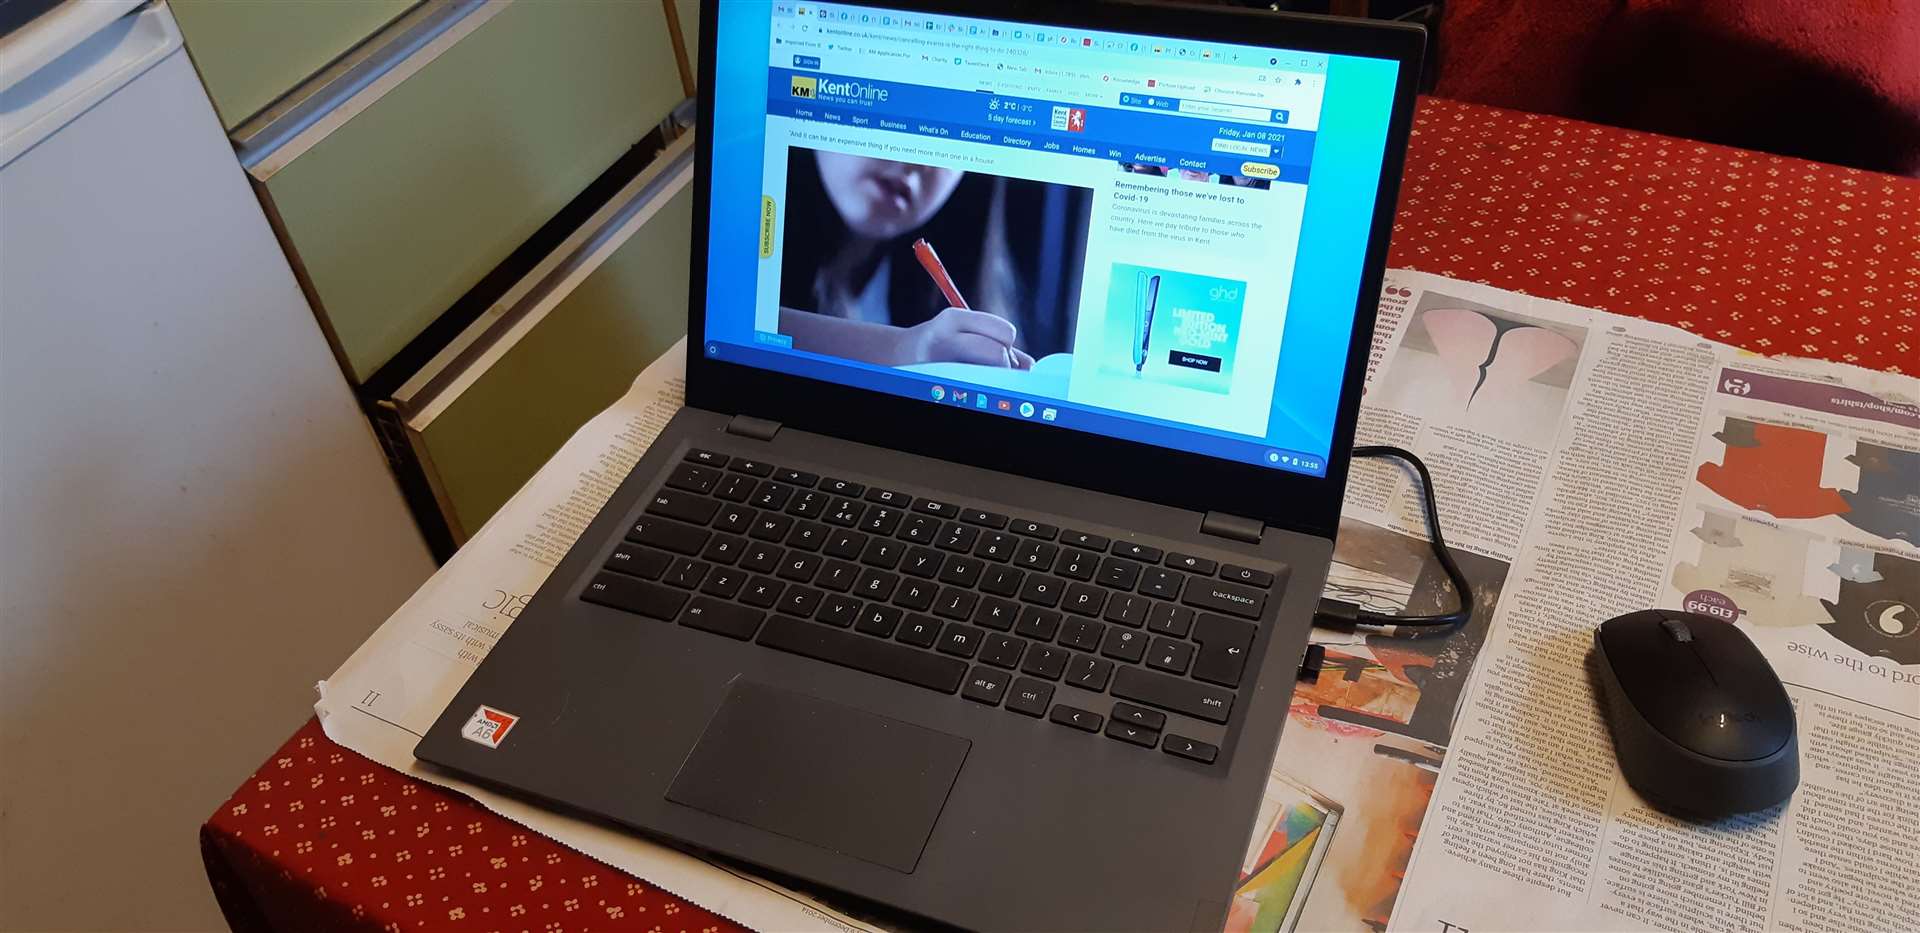 More laptops are being provided for pupils to learn at home